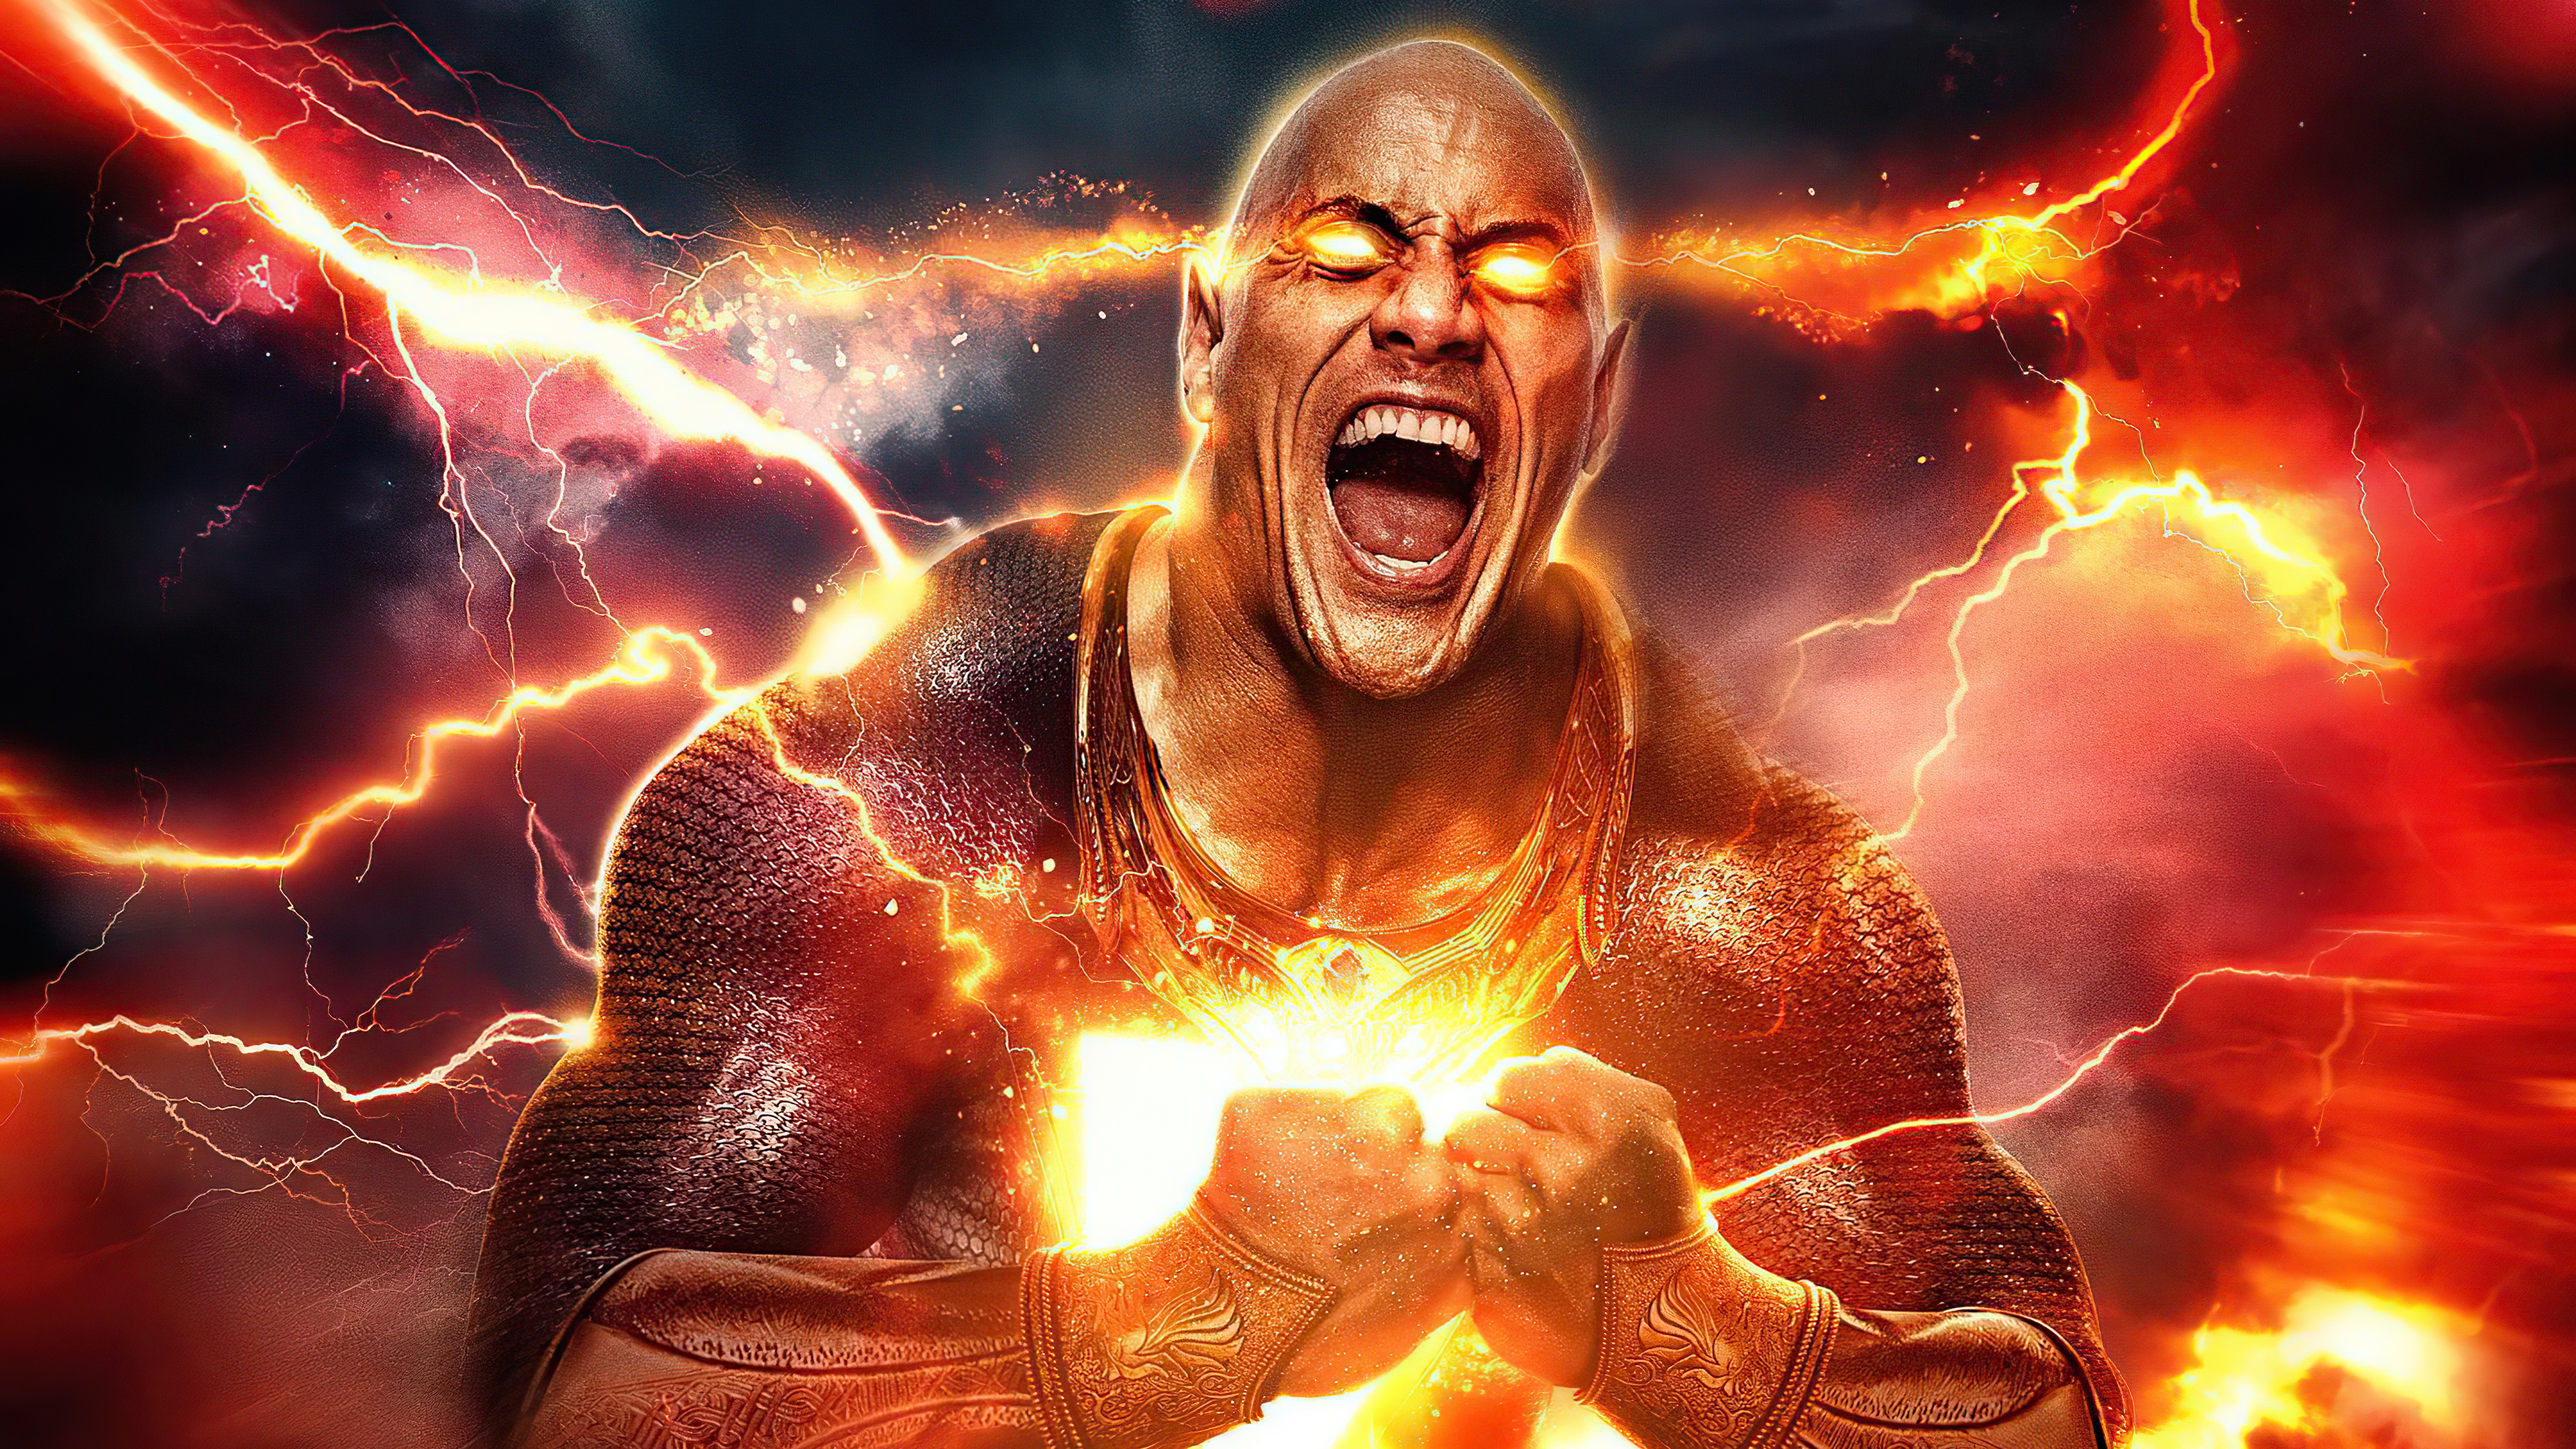 Black adam the fire hd movies k wallpapers images backgrounds photos and pictures